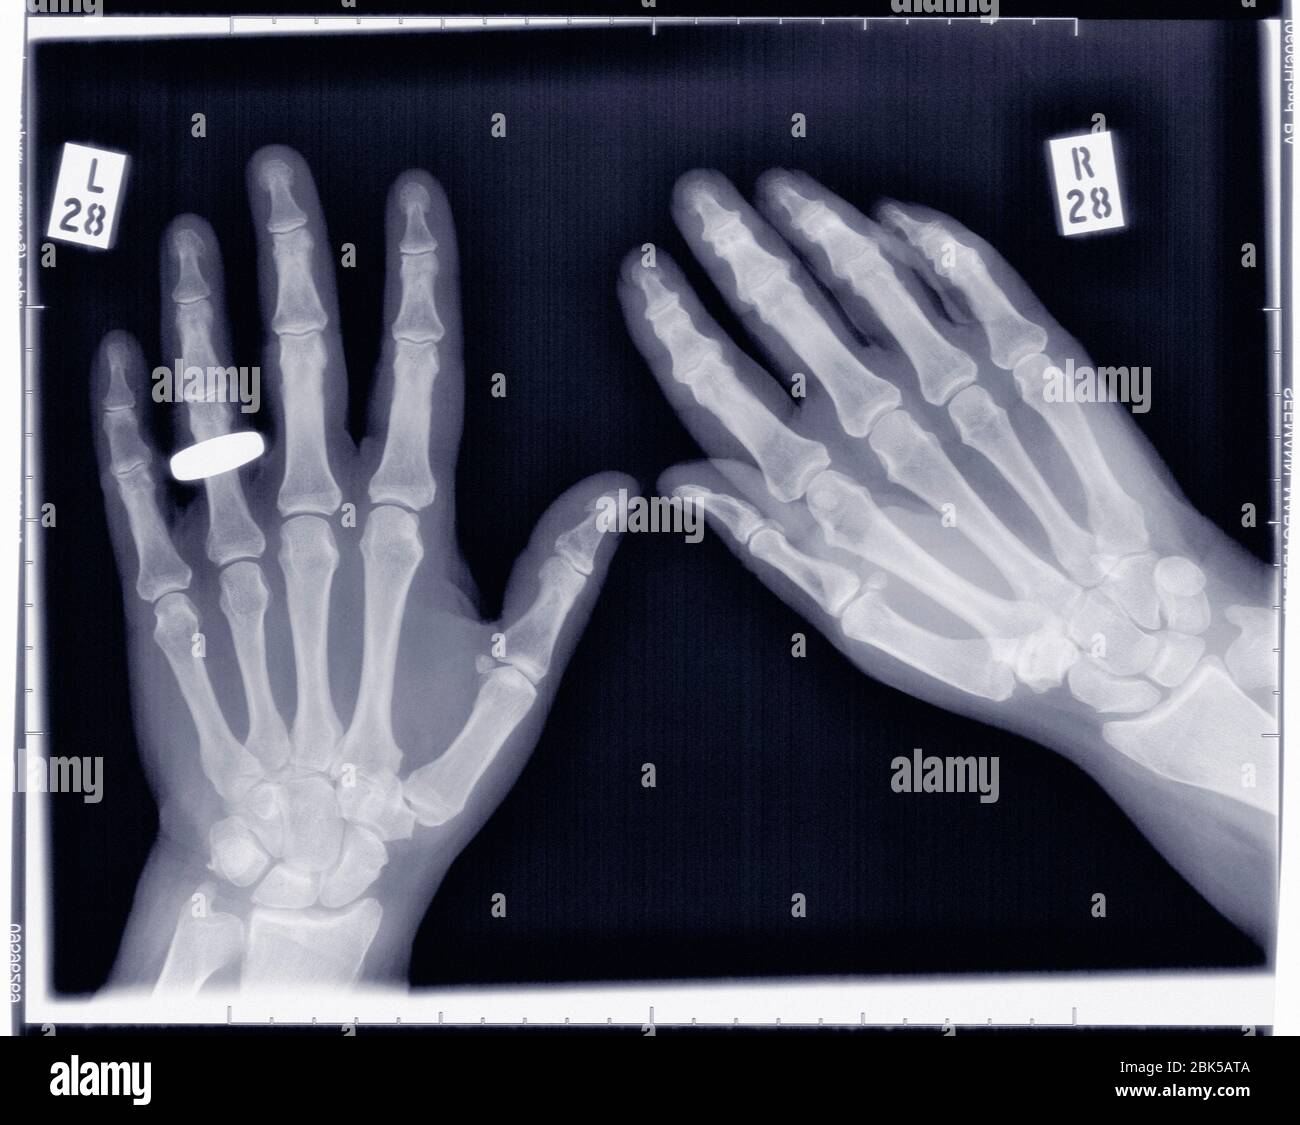 Hands with wedding ring on left hand, X-ray. Stock Photo